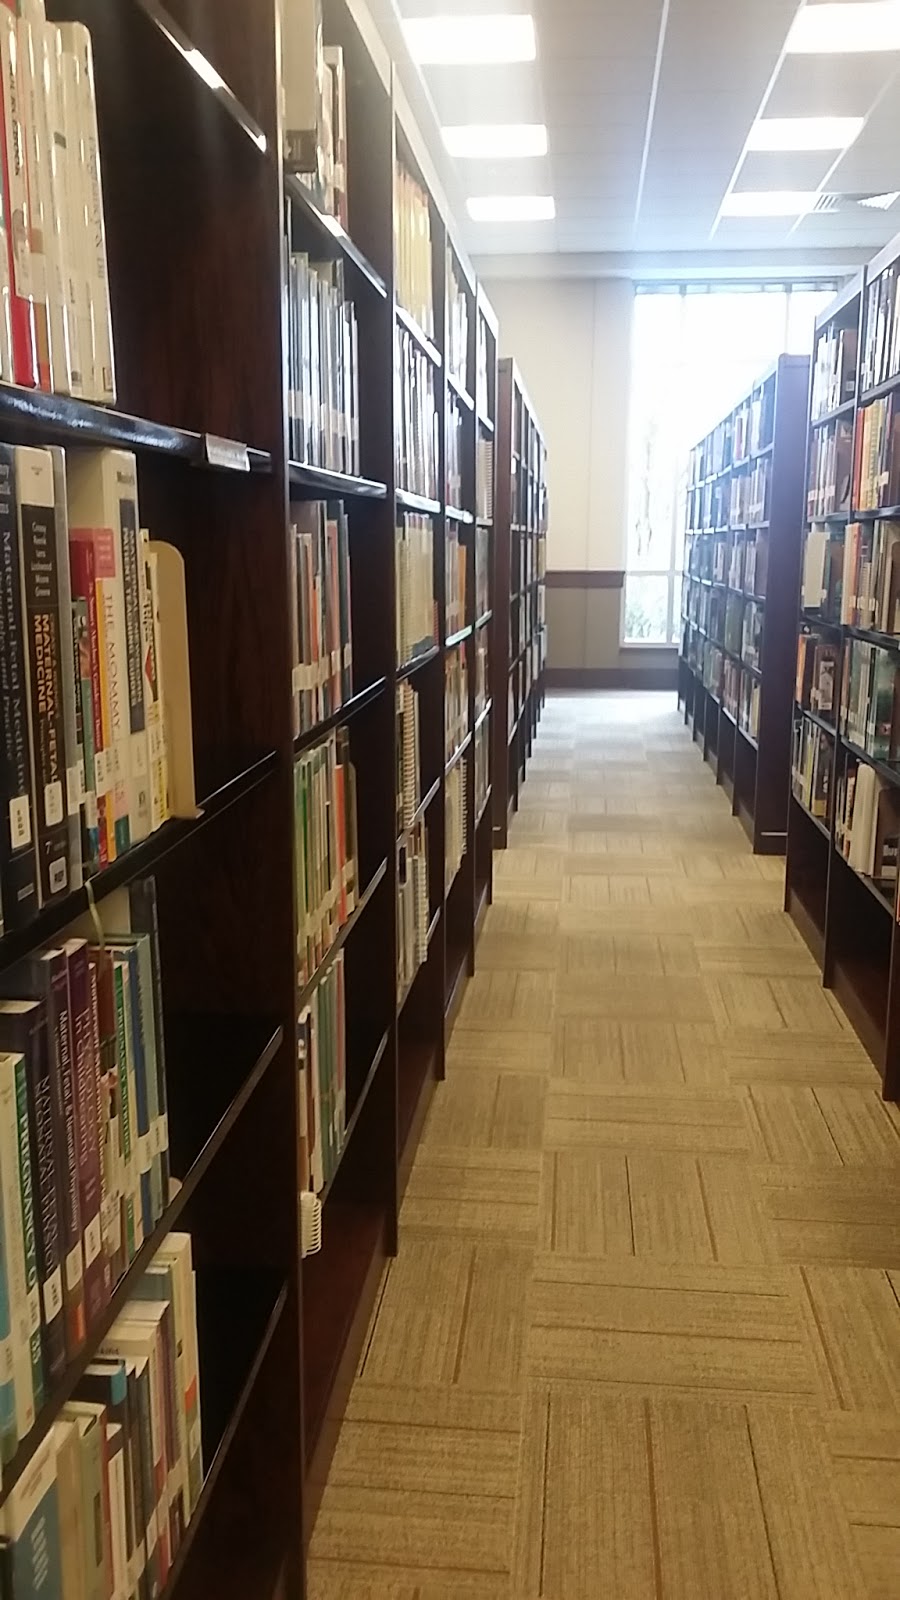 McKinney Campus (Central Park) Library - library  | Photo 10 of 10 | Address: 2200 W University Dr, McKinney, TX 75071, USA | Phone: (972) 548-6860